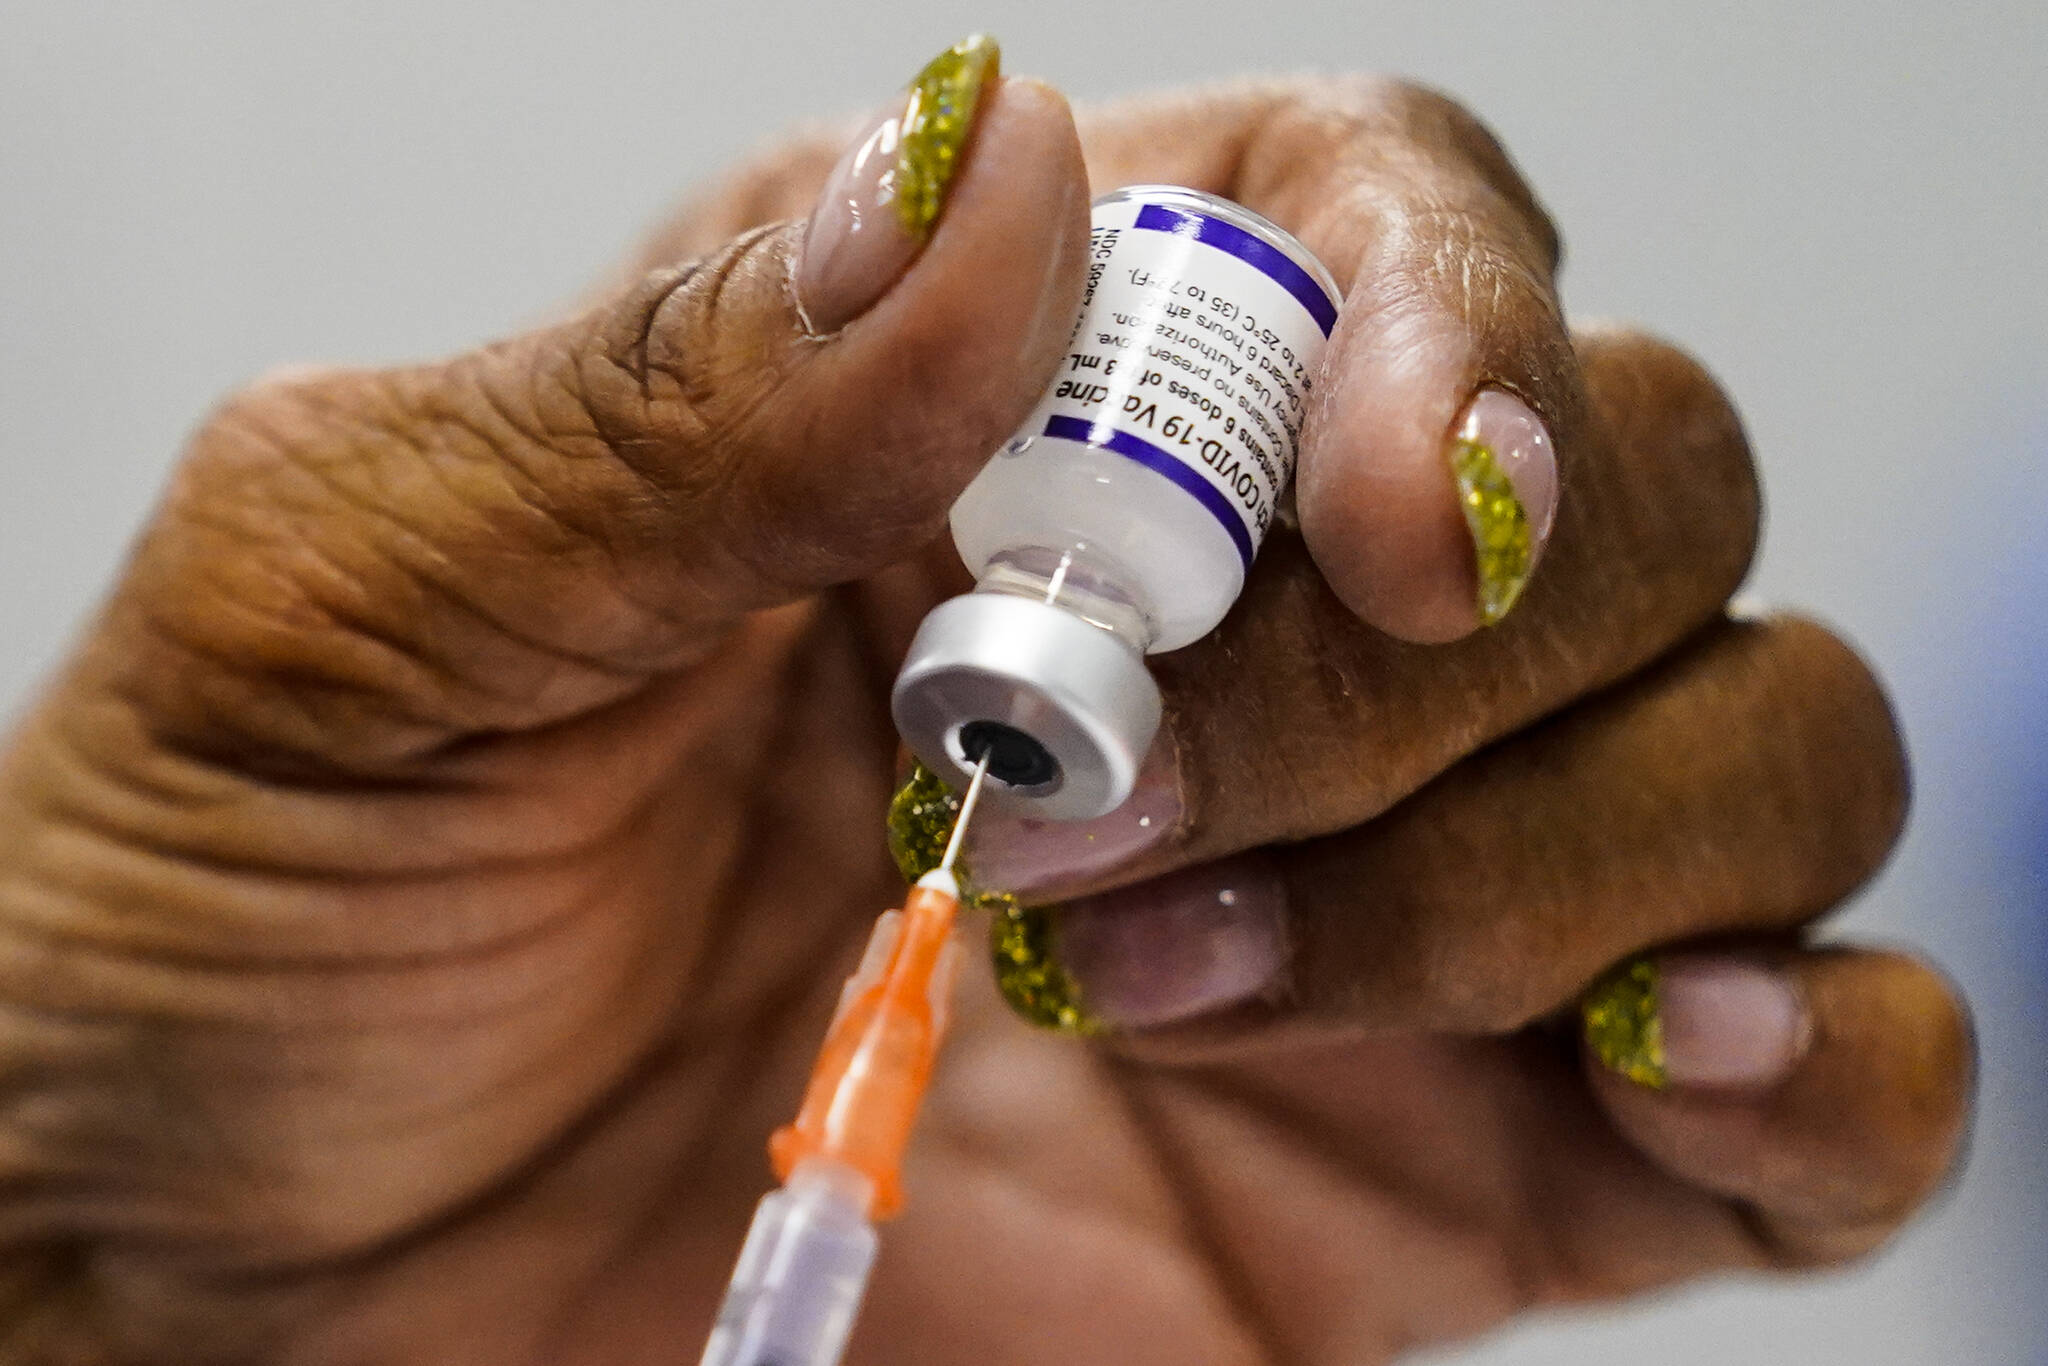 A syringe is prepared with the Pfizer COVID-19 vaccine at a vaccination clinic at the Keystone First Wellness Center in Chester, Pa., Wednesday, Dec. 15, 2021. As of Monday, Dec. 20, 87.3 per cent of eligible people five and older in B.C. have received their first vaccine dose. (AP Photo/Matt Rourke)